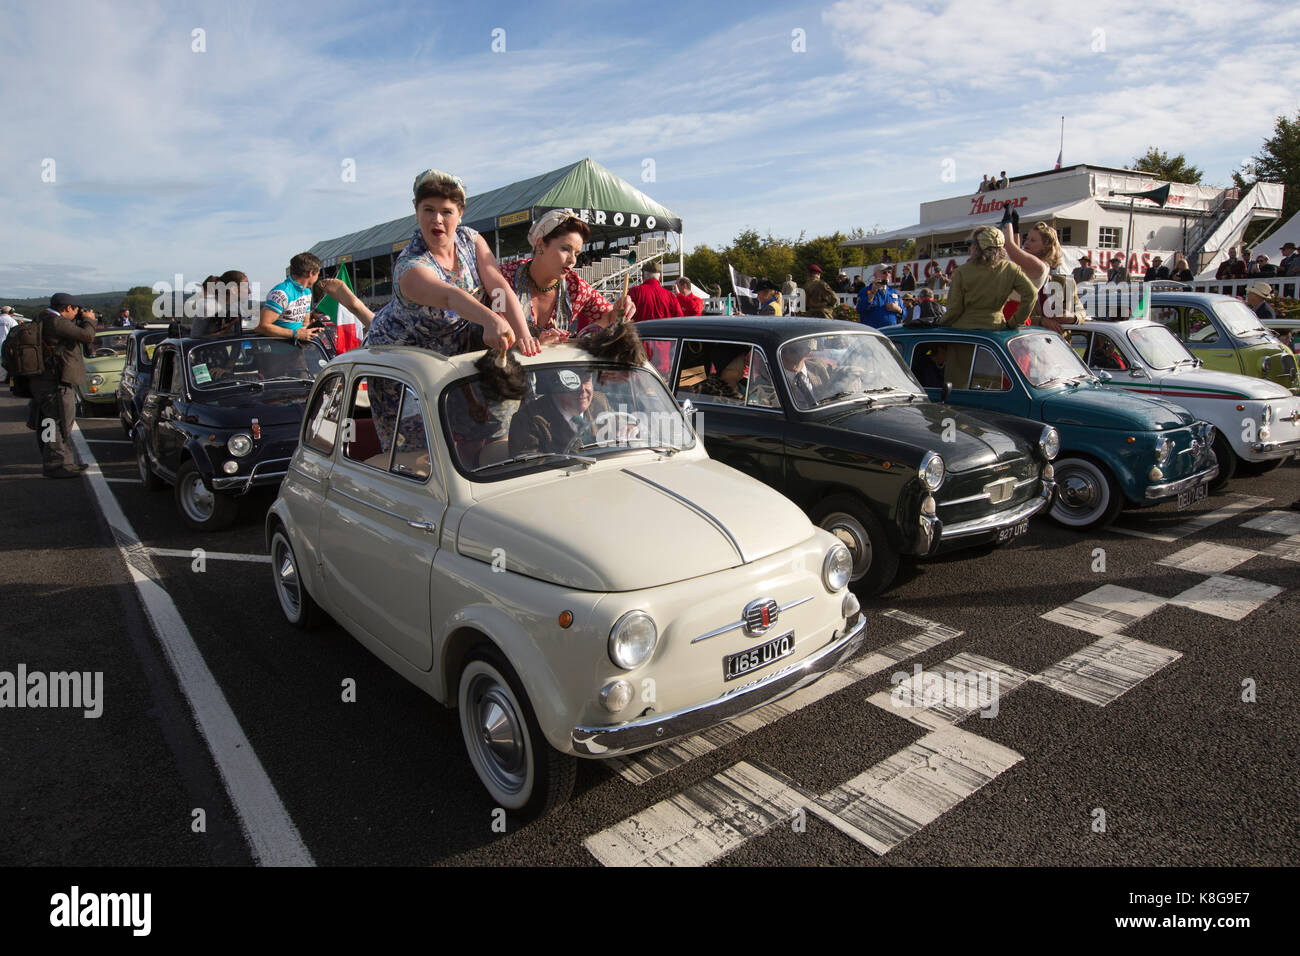 FIAT 500 Parade, Goodwood Revival 2017 Meeting, Goodwood race track, organised by the British Automobile Racing Club, Chichester, West Sussex, England Stock Photo